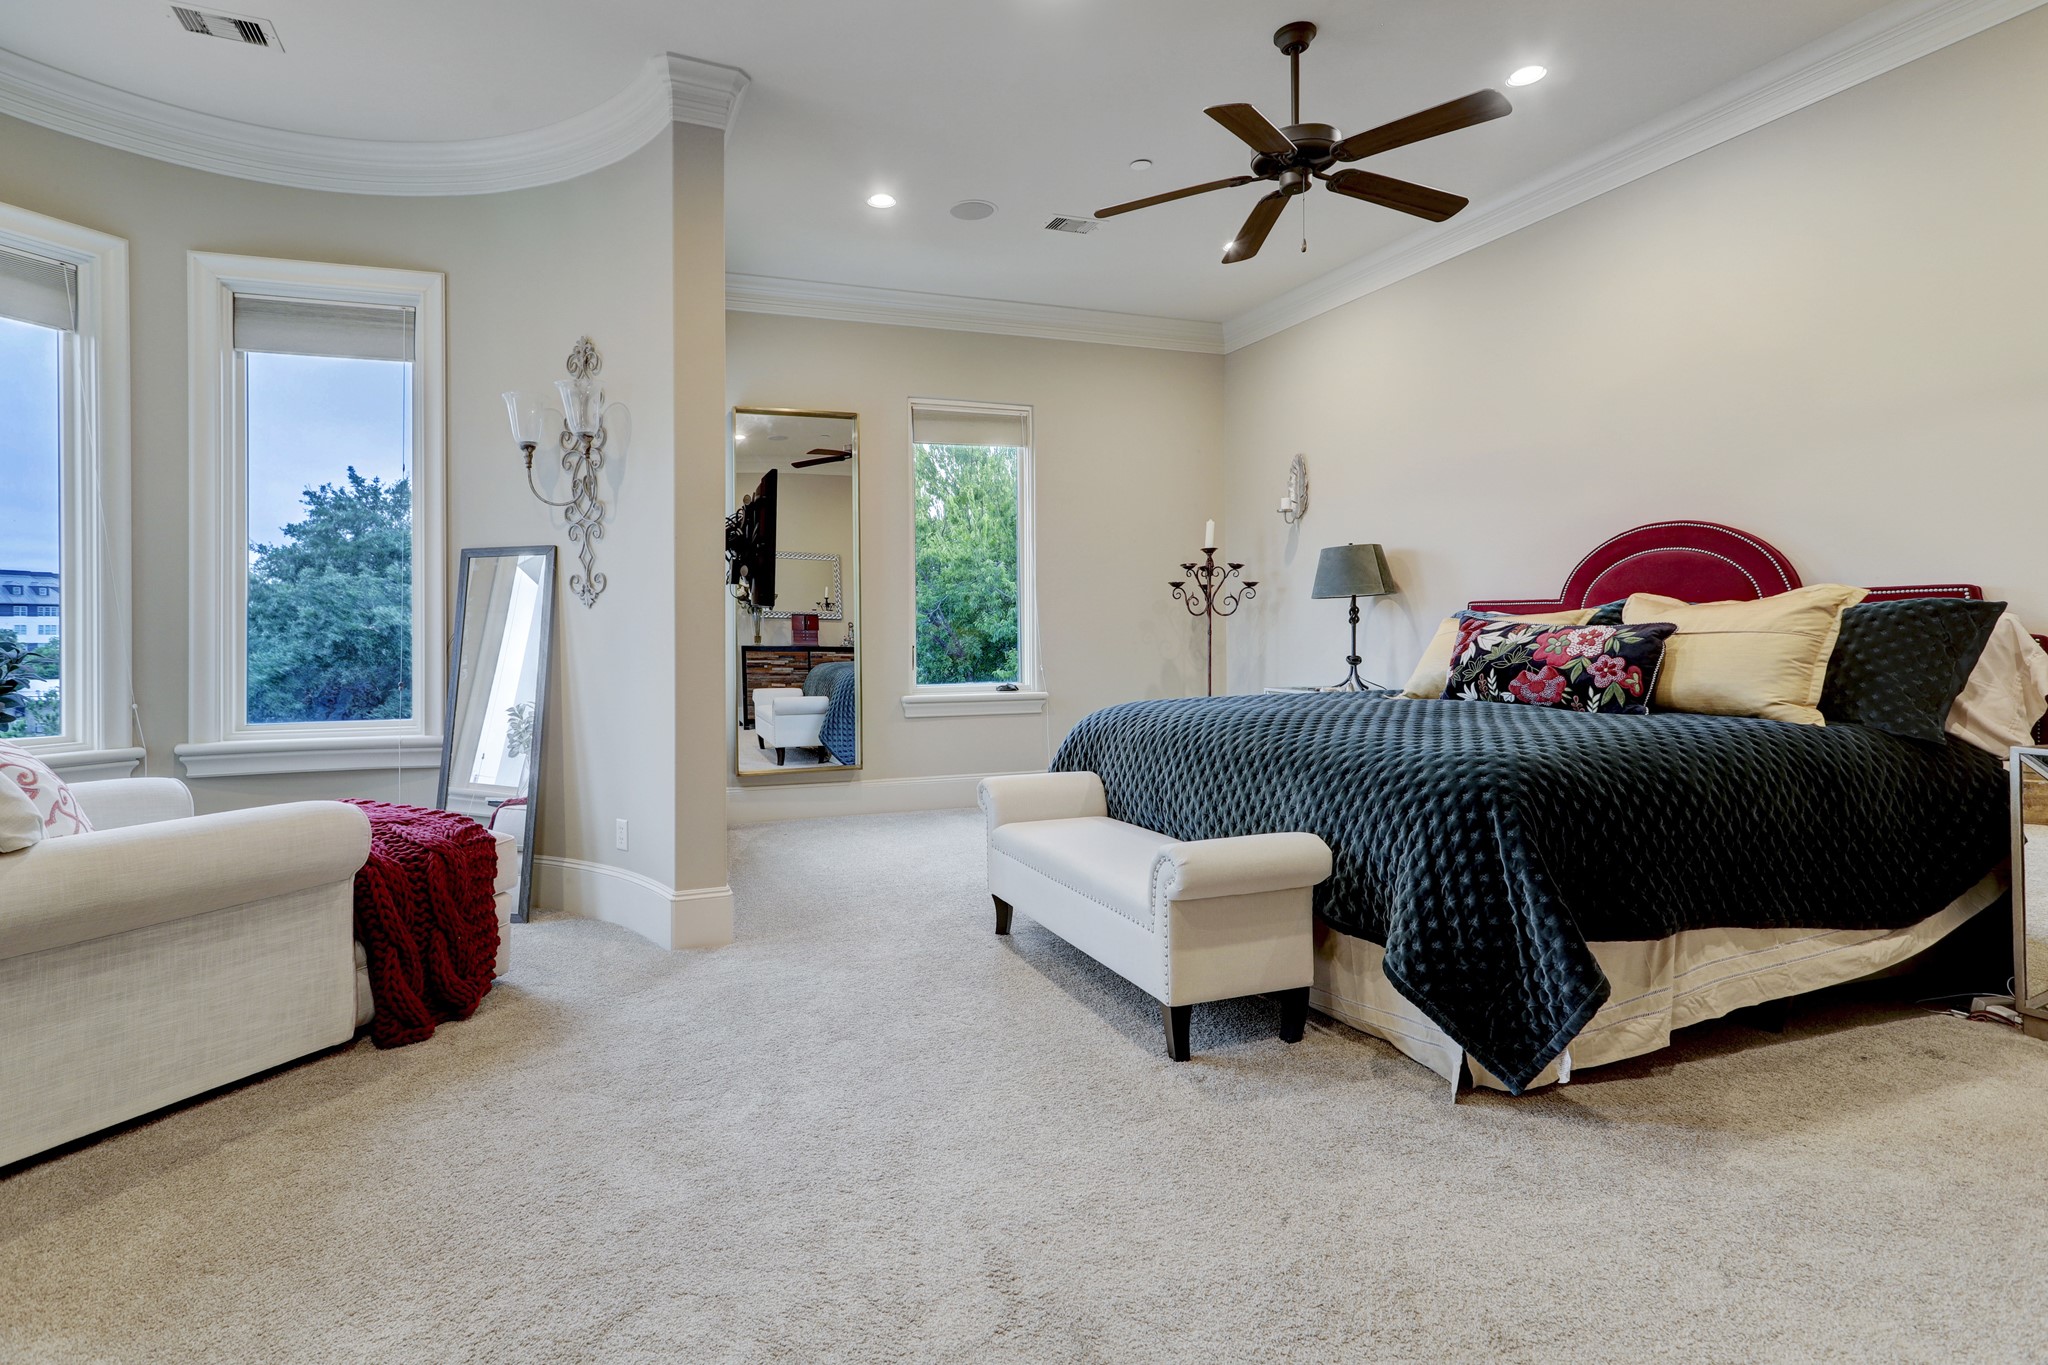 Rest at ease in this primary bedroom with plenty of space for furniture and enjoy.